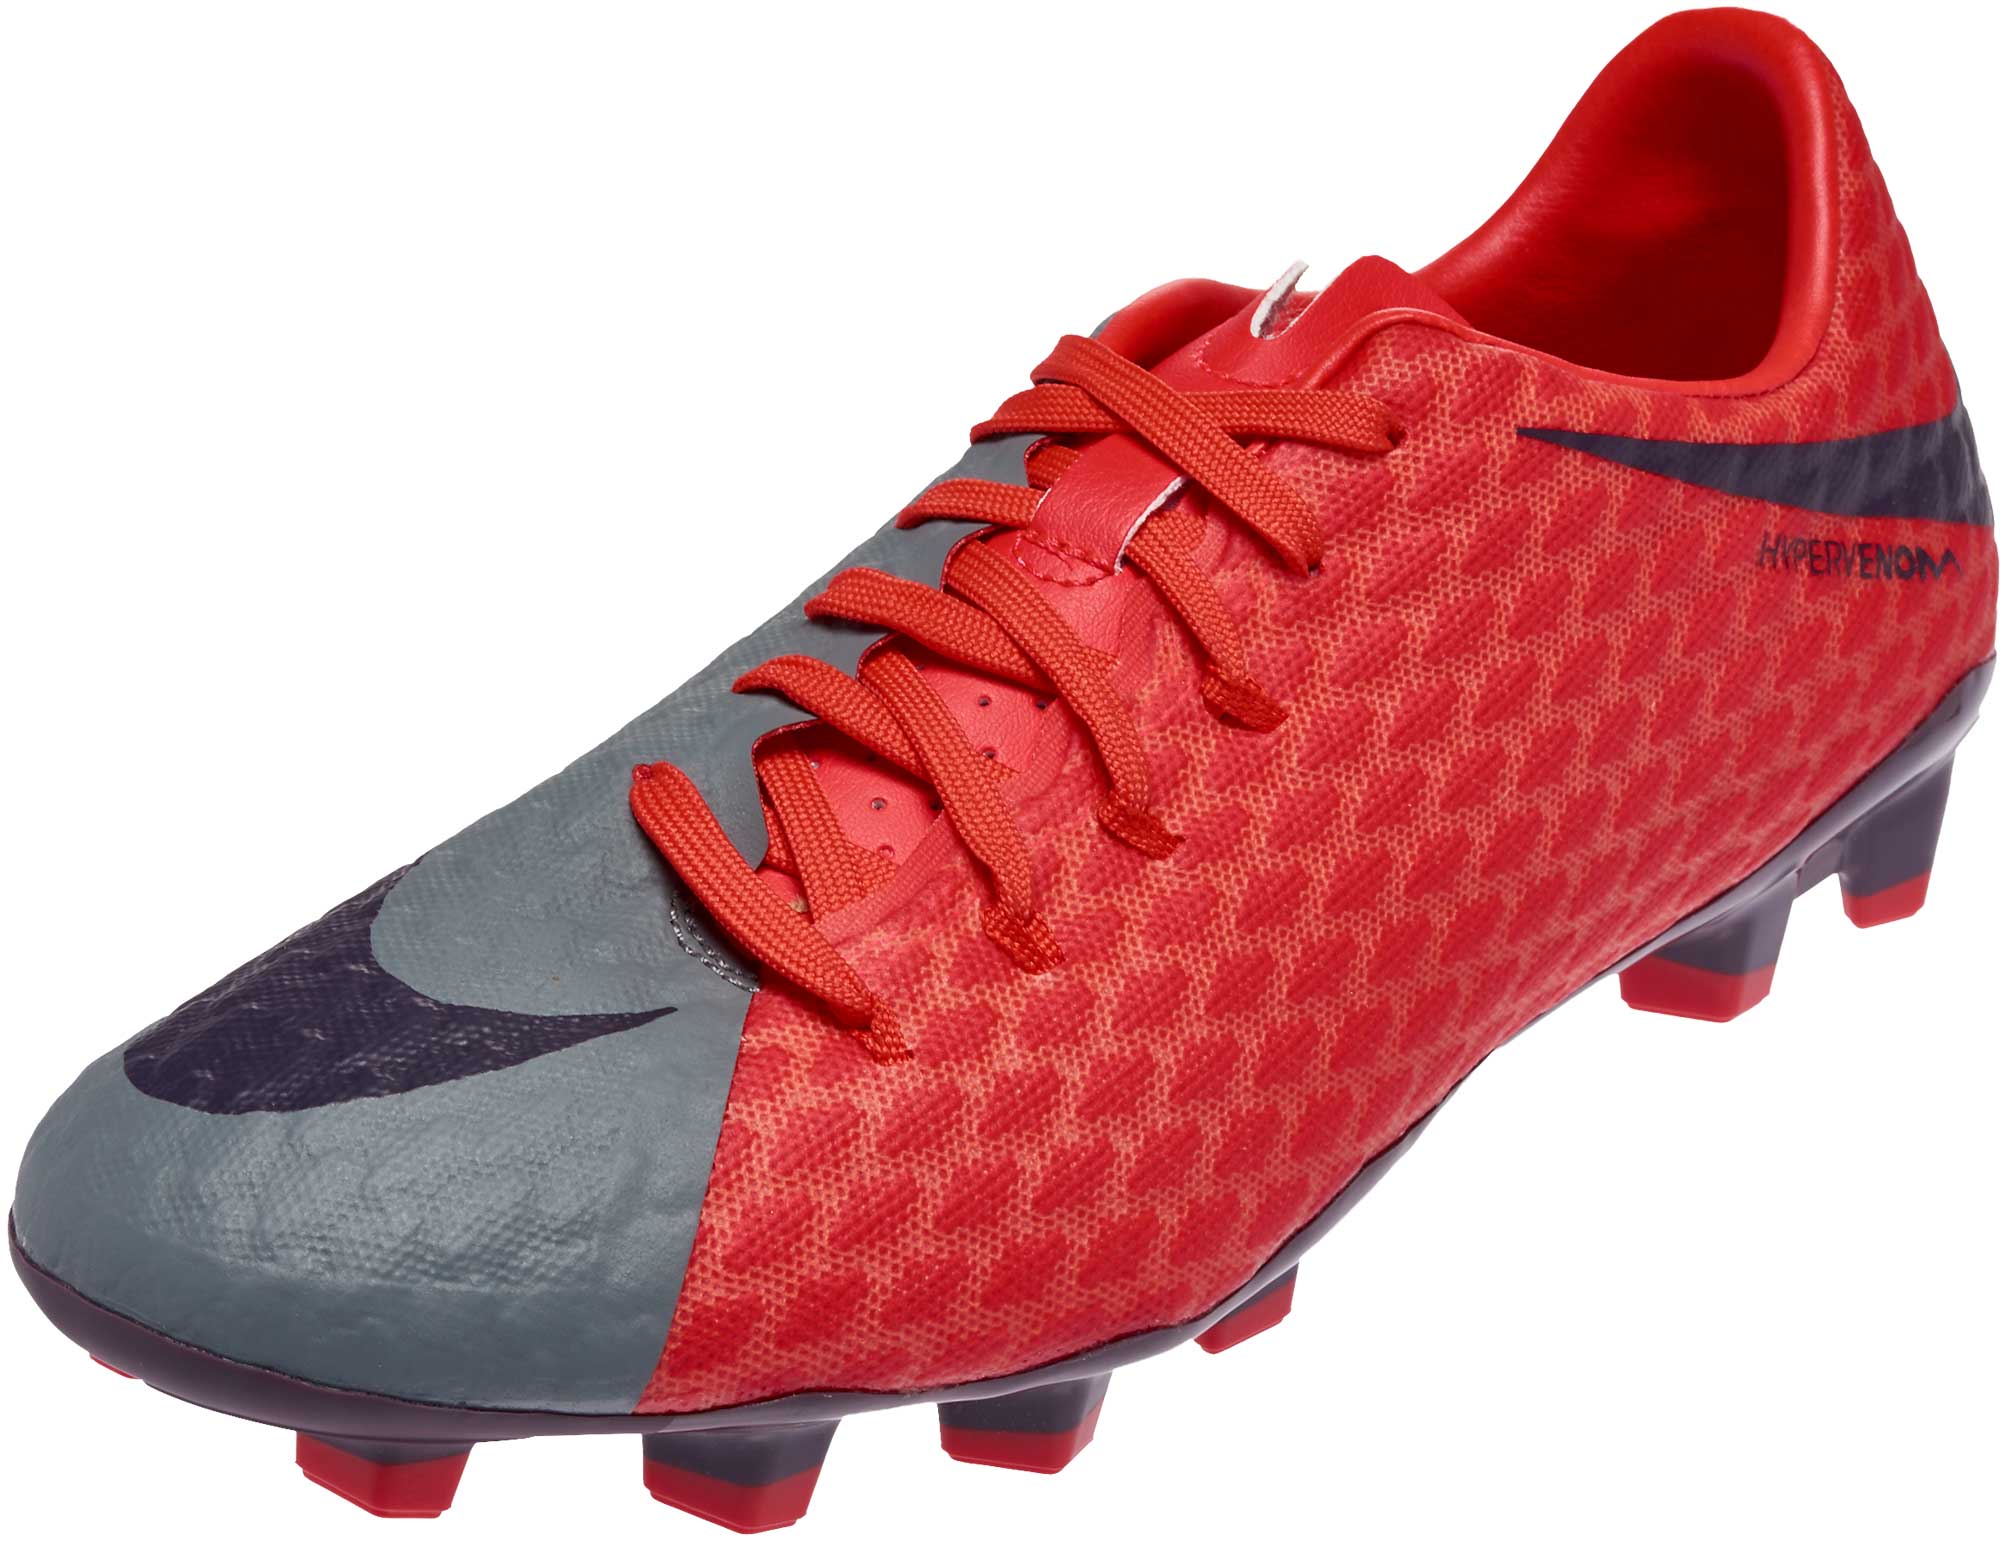 red and grey hypervenoms